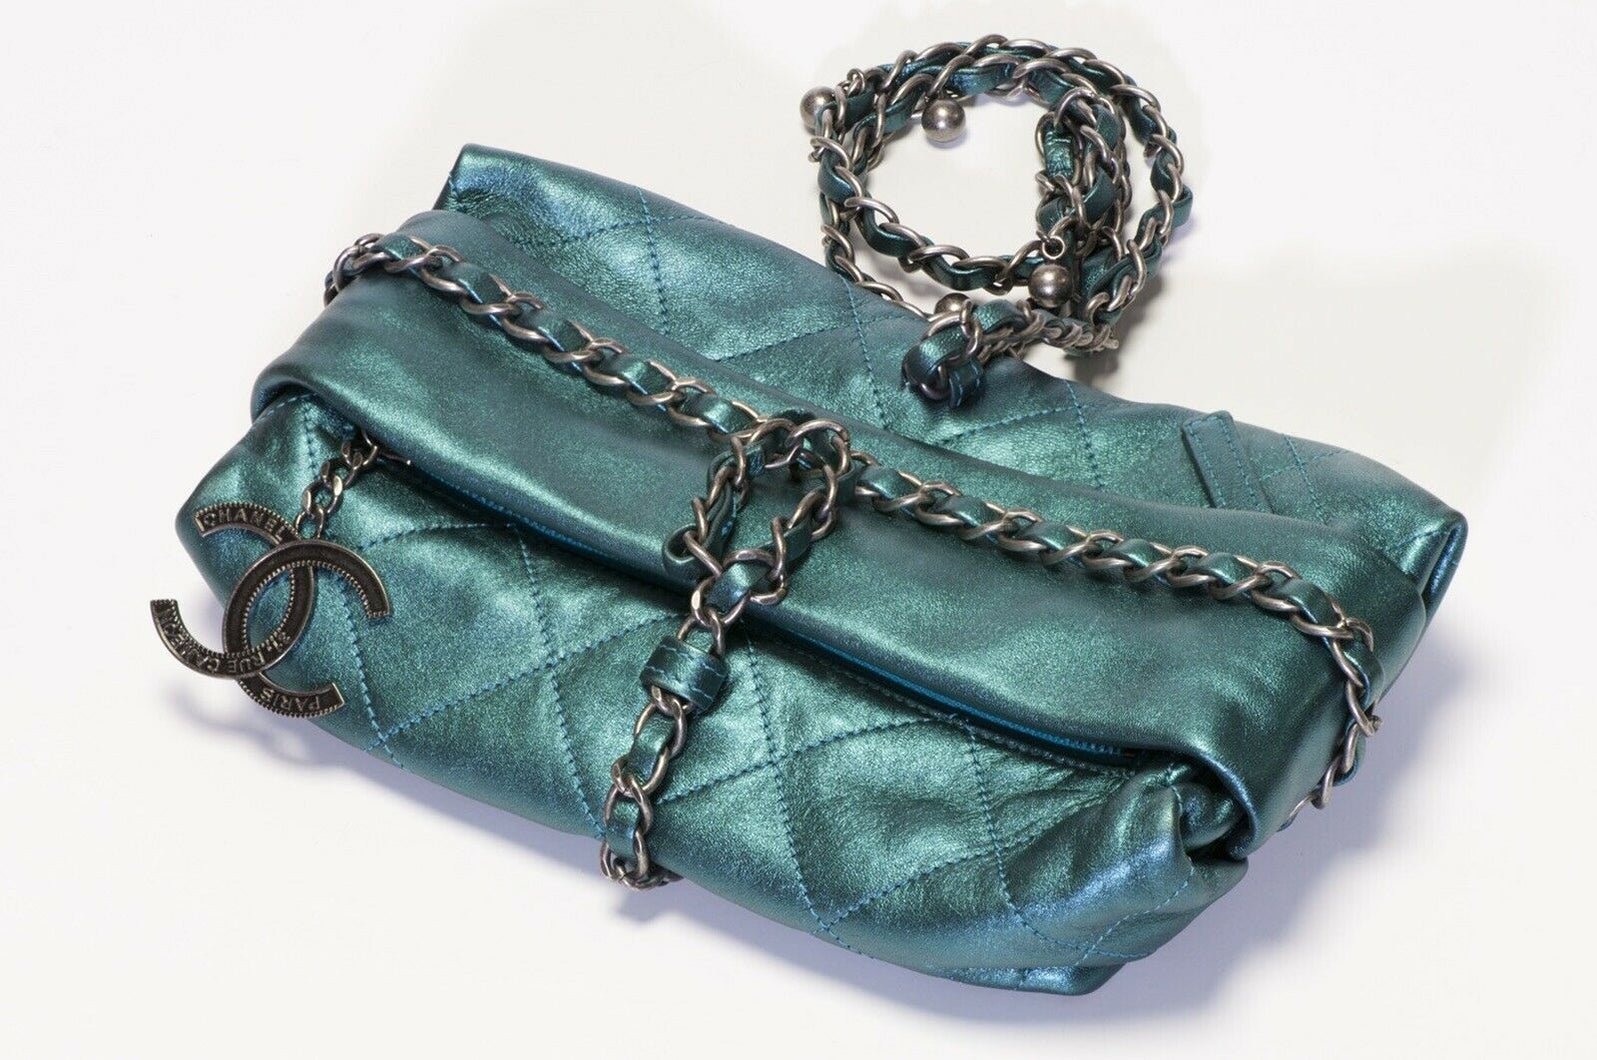 CHANEL Baluchon 2012 Turquoise Green Quilted Leather CC Wrap Chain Bag